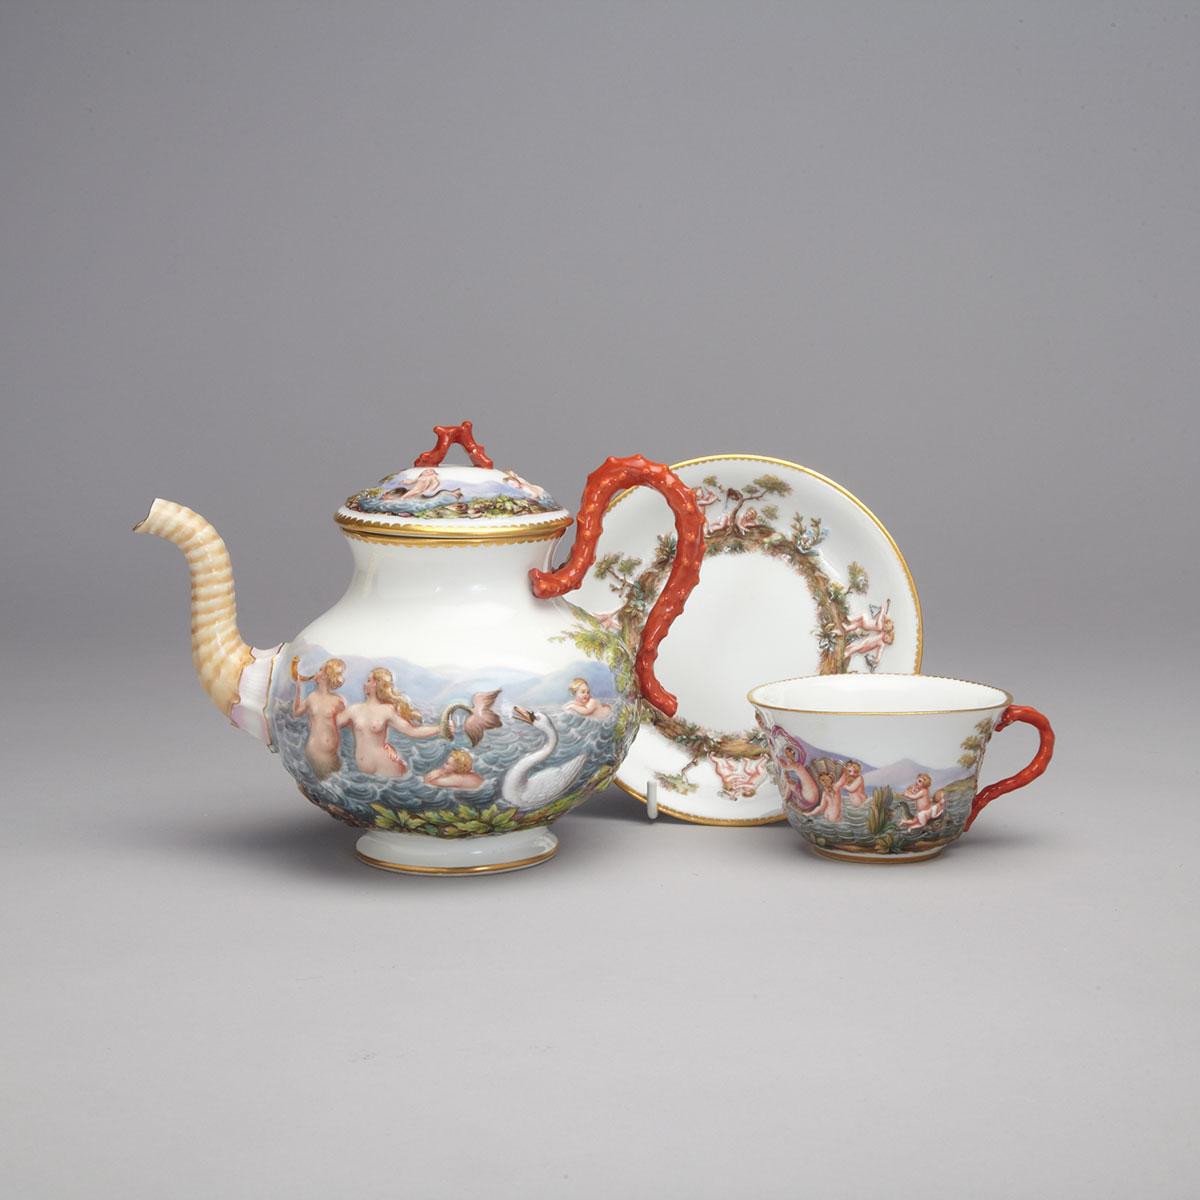 German Porcelain Capodimonte Style Teapot, Cup and Saucer, c.1900